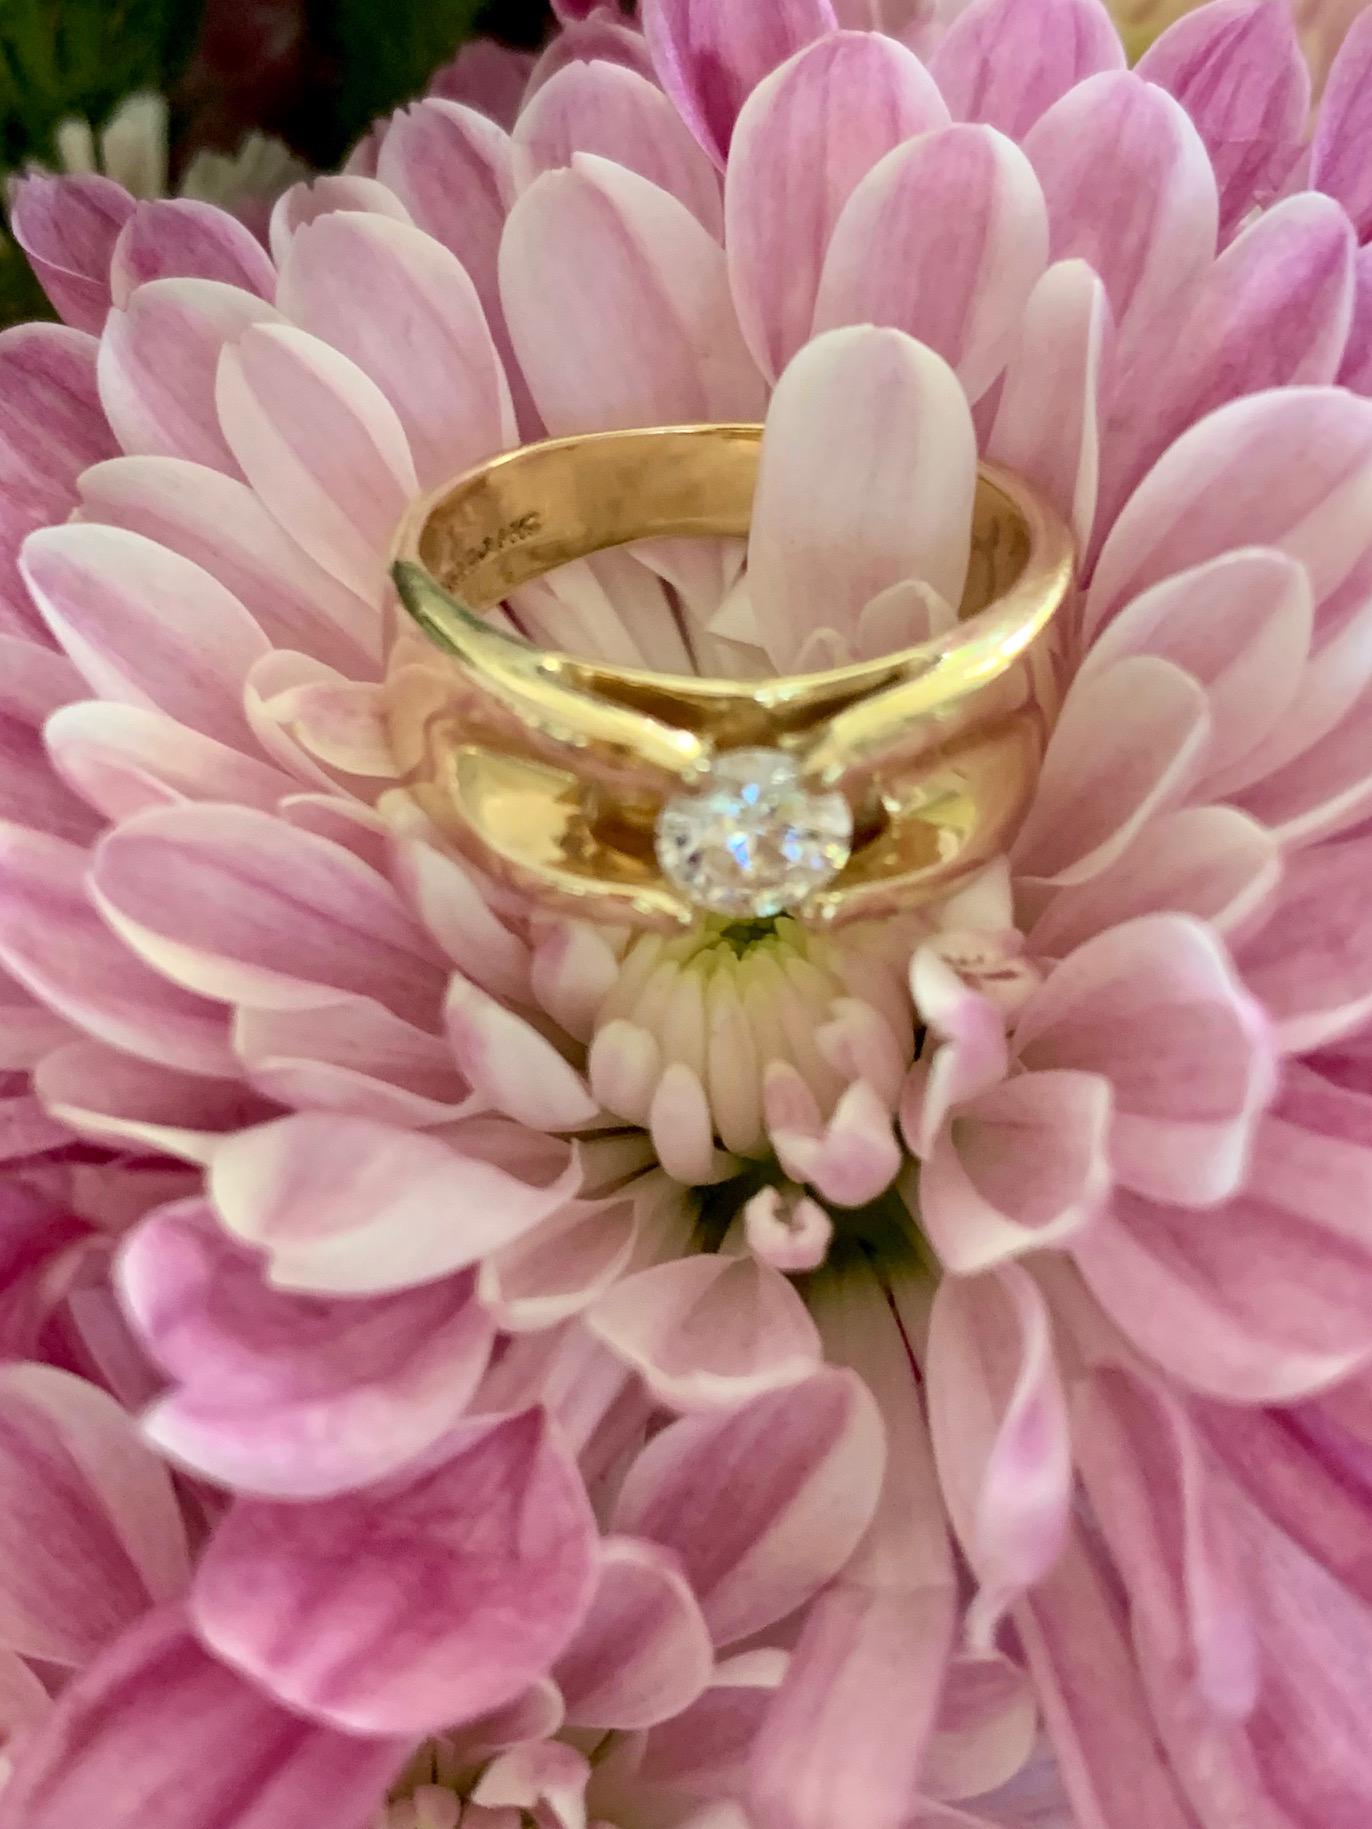 This classic Magic-glo diamond wedding band is made of solid 14k yellow gold and has a comfort fit so it's thick, smooth and has beveled edges.

The ring is a modern design and has a high shine polish.

It is stamped 